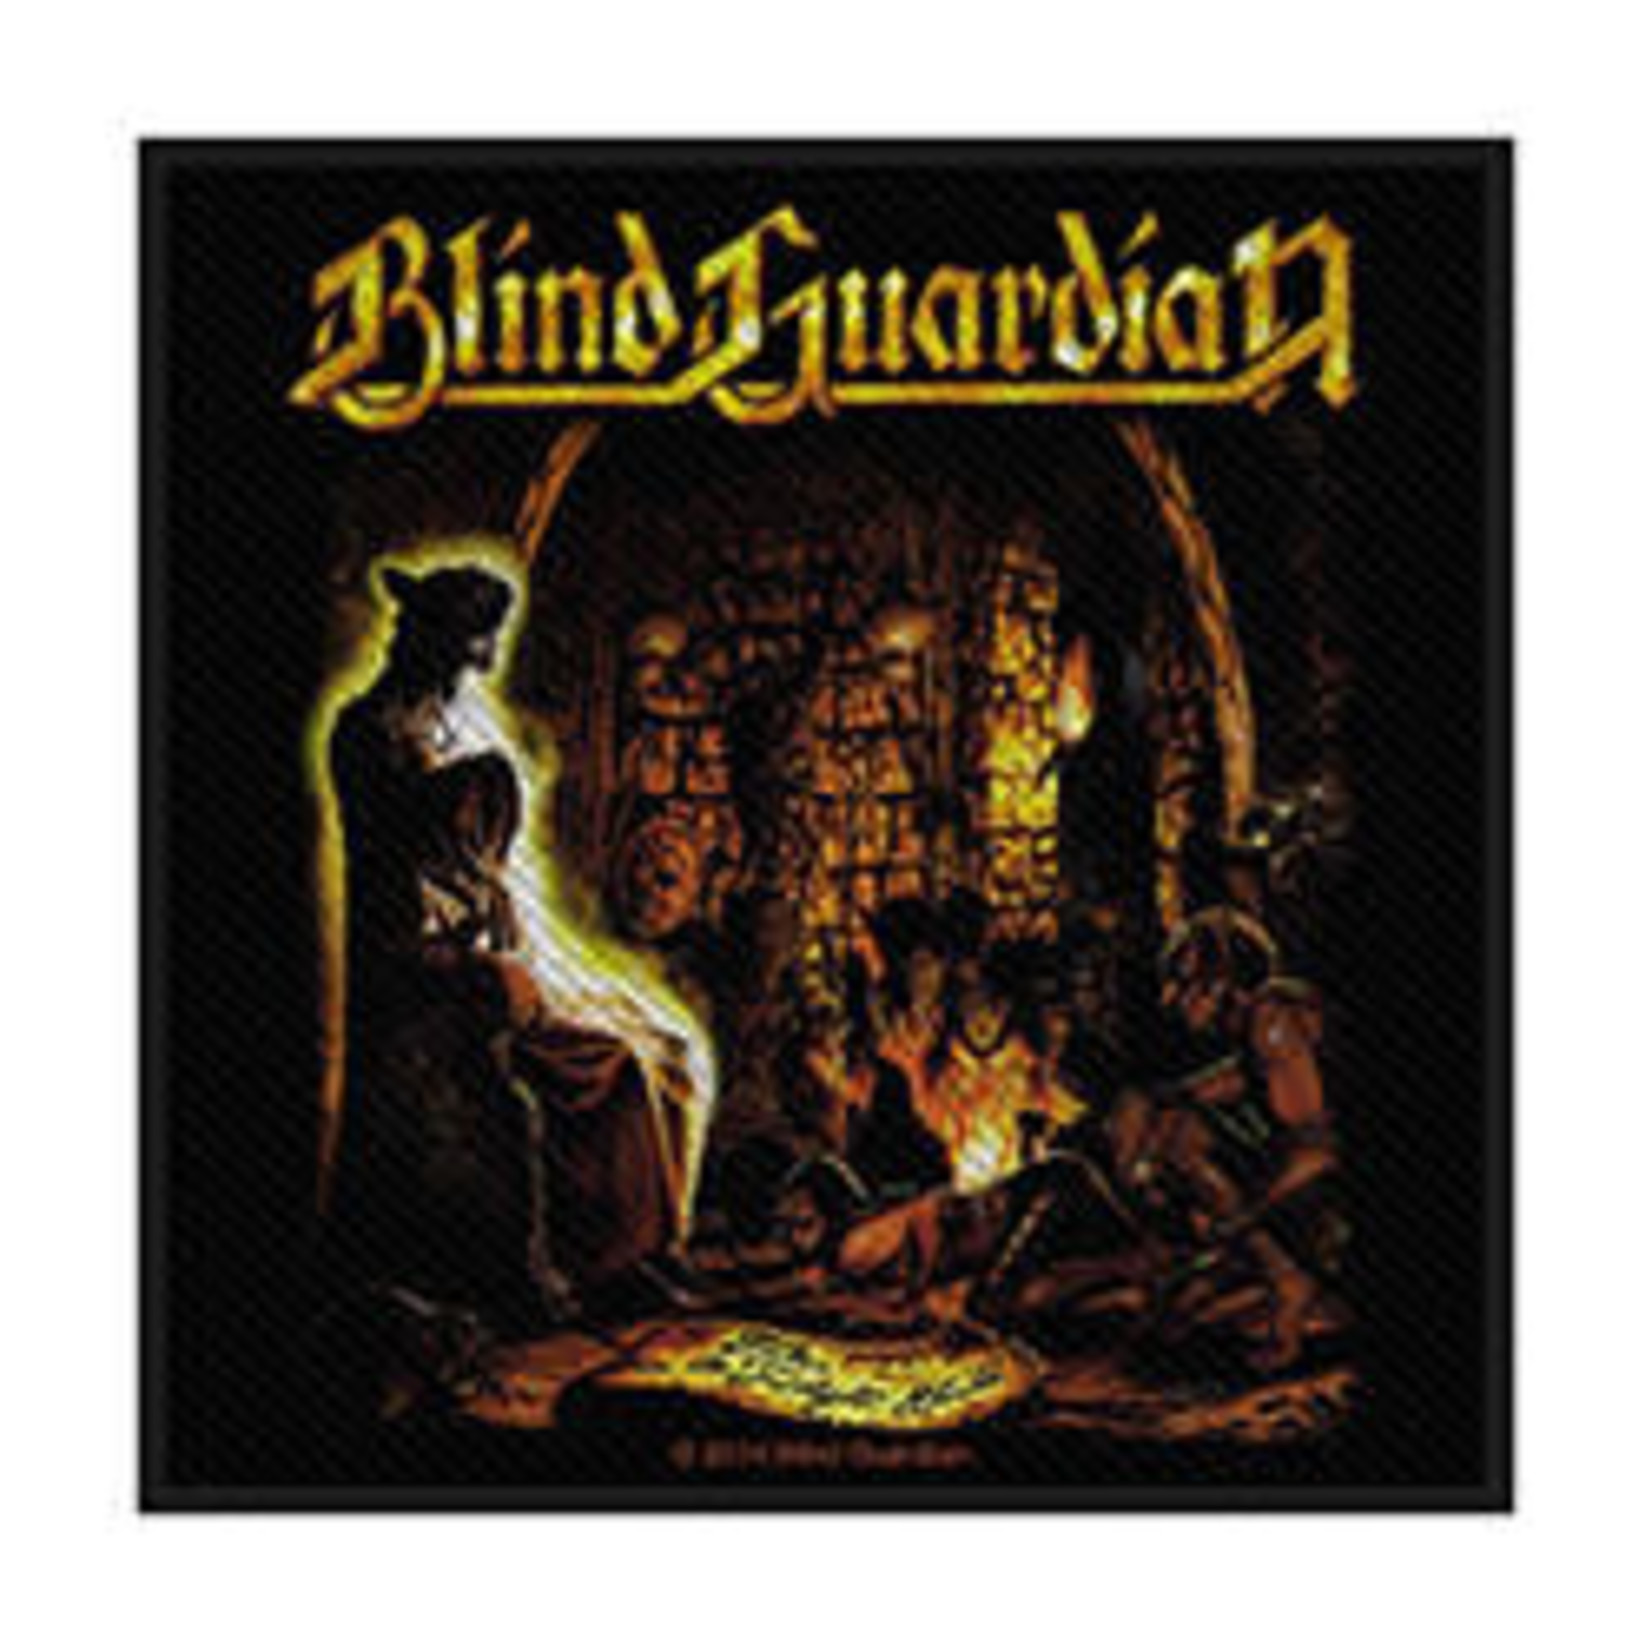 Patch - Blind Guardian: Tales From The Twilight